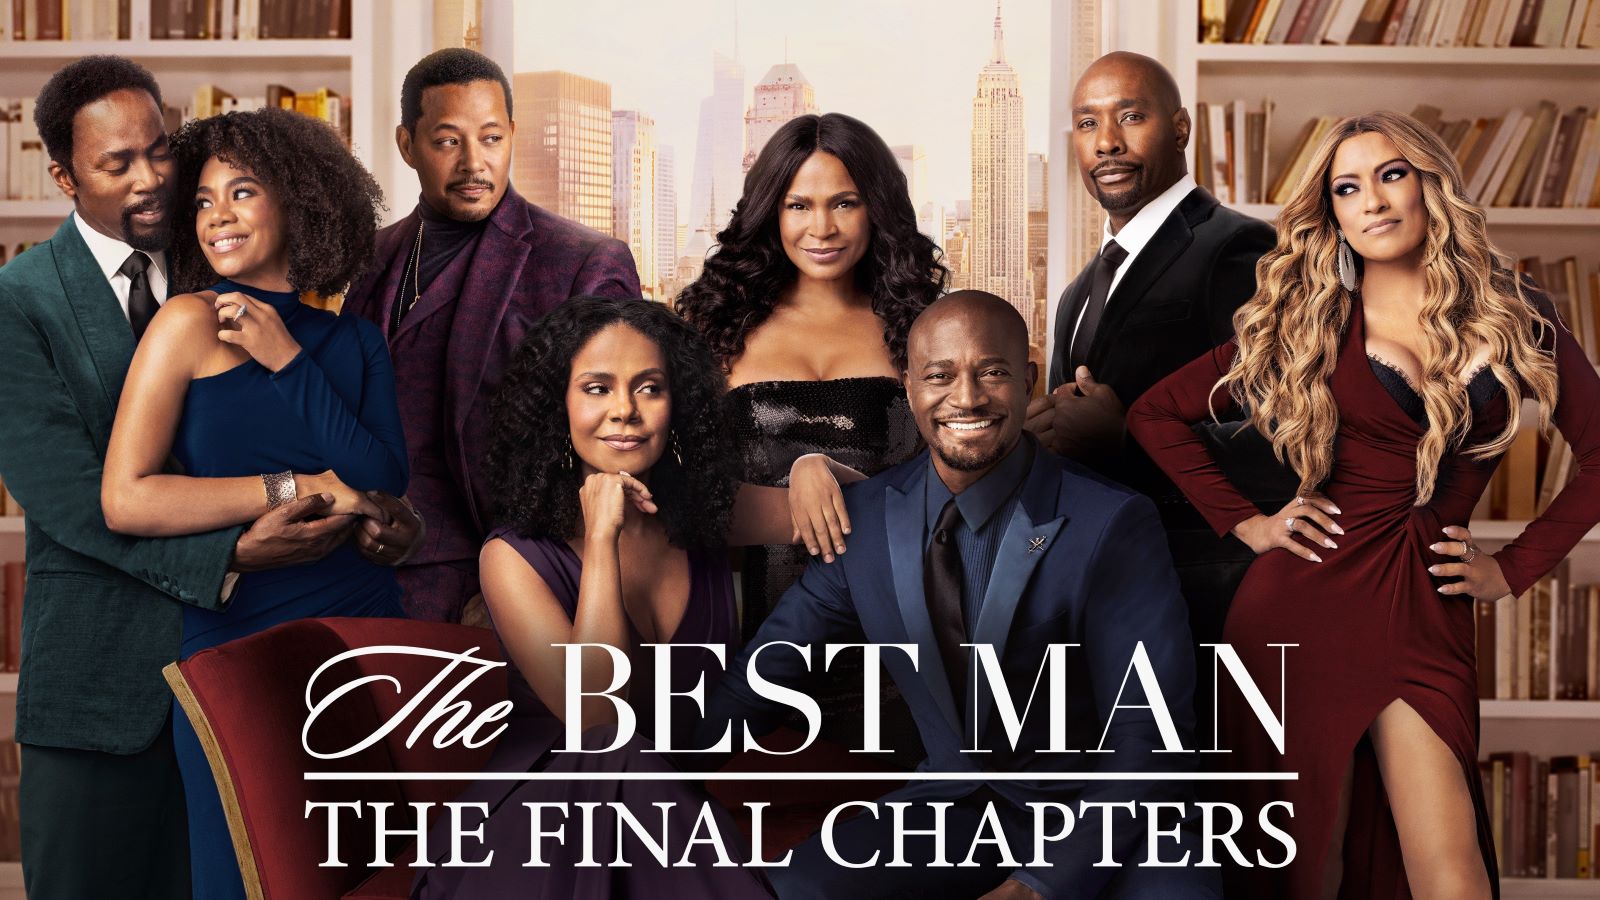 How to Watch The Best Man The Final Chapters Online From Anywhere